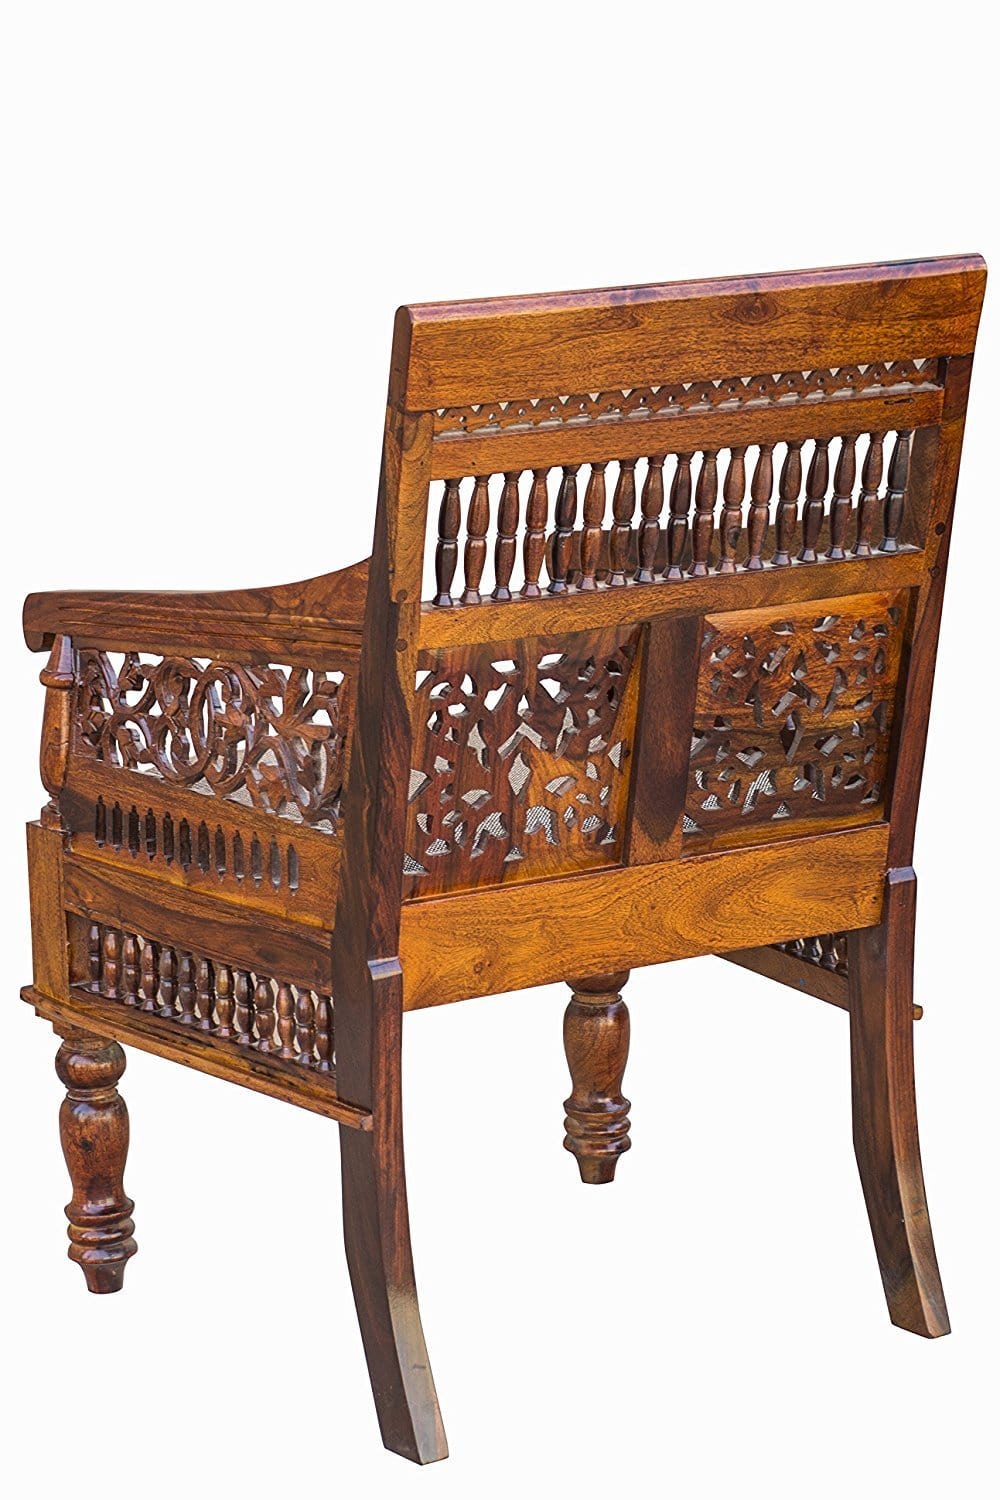 Pure Sheesham Wood Antique Look Seating Chair/Wooden Handmade King of Chair for Living Room